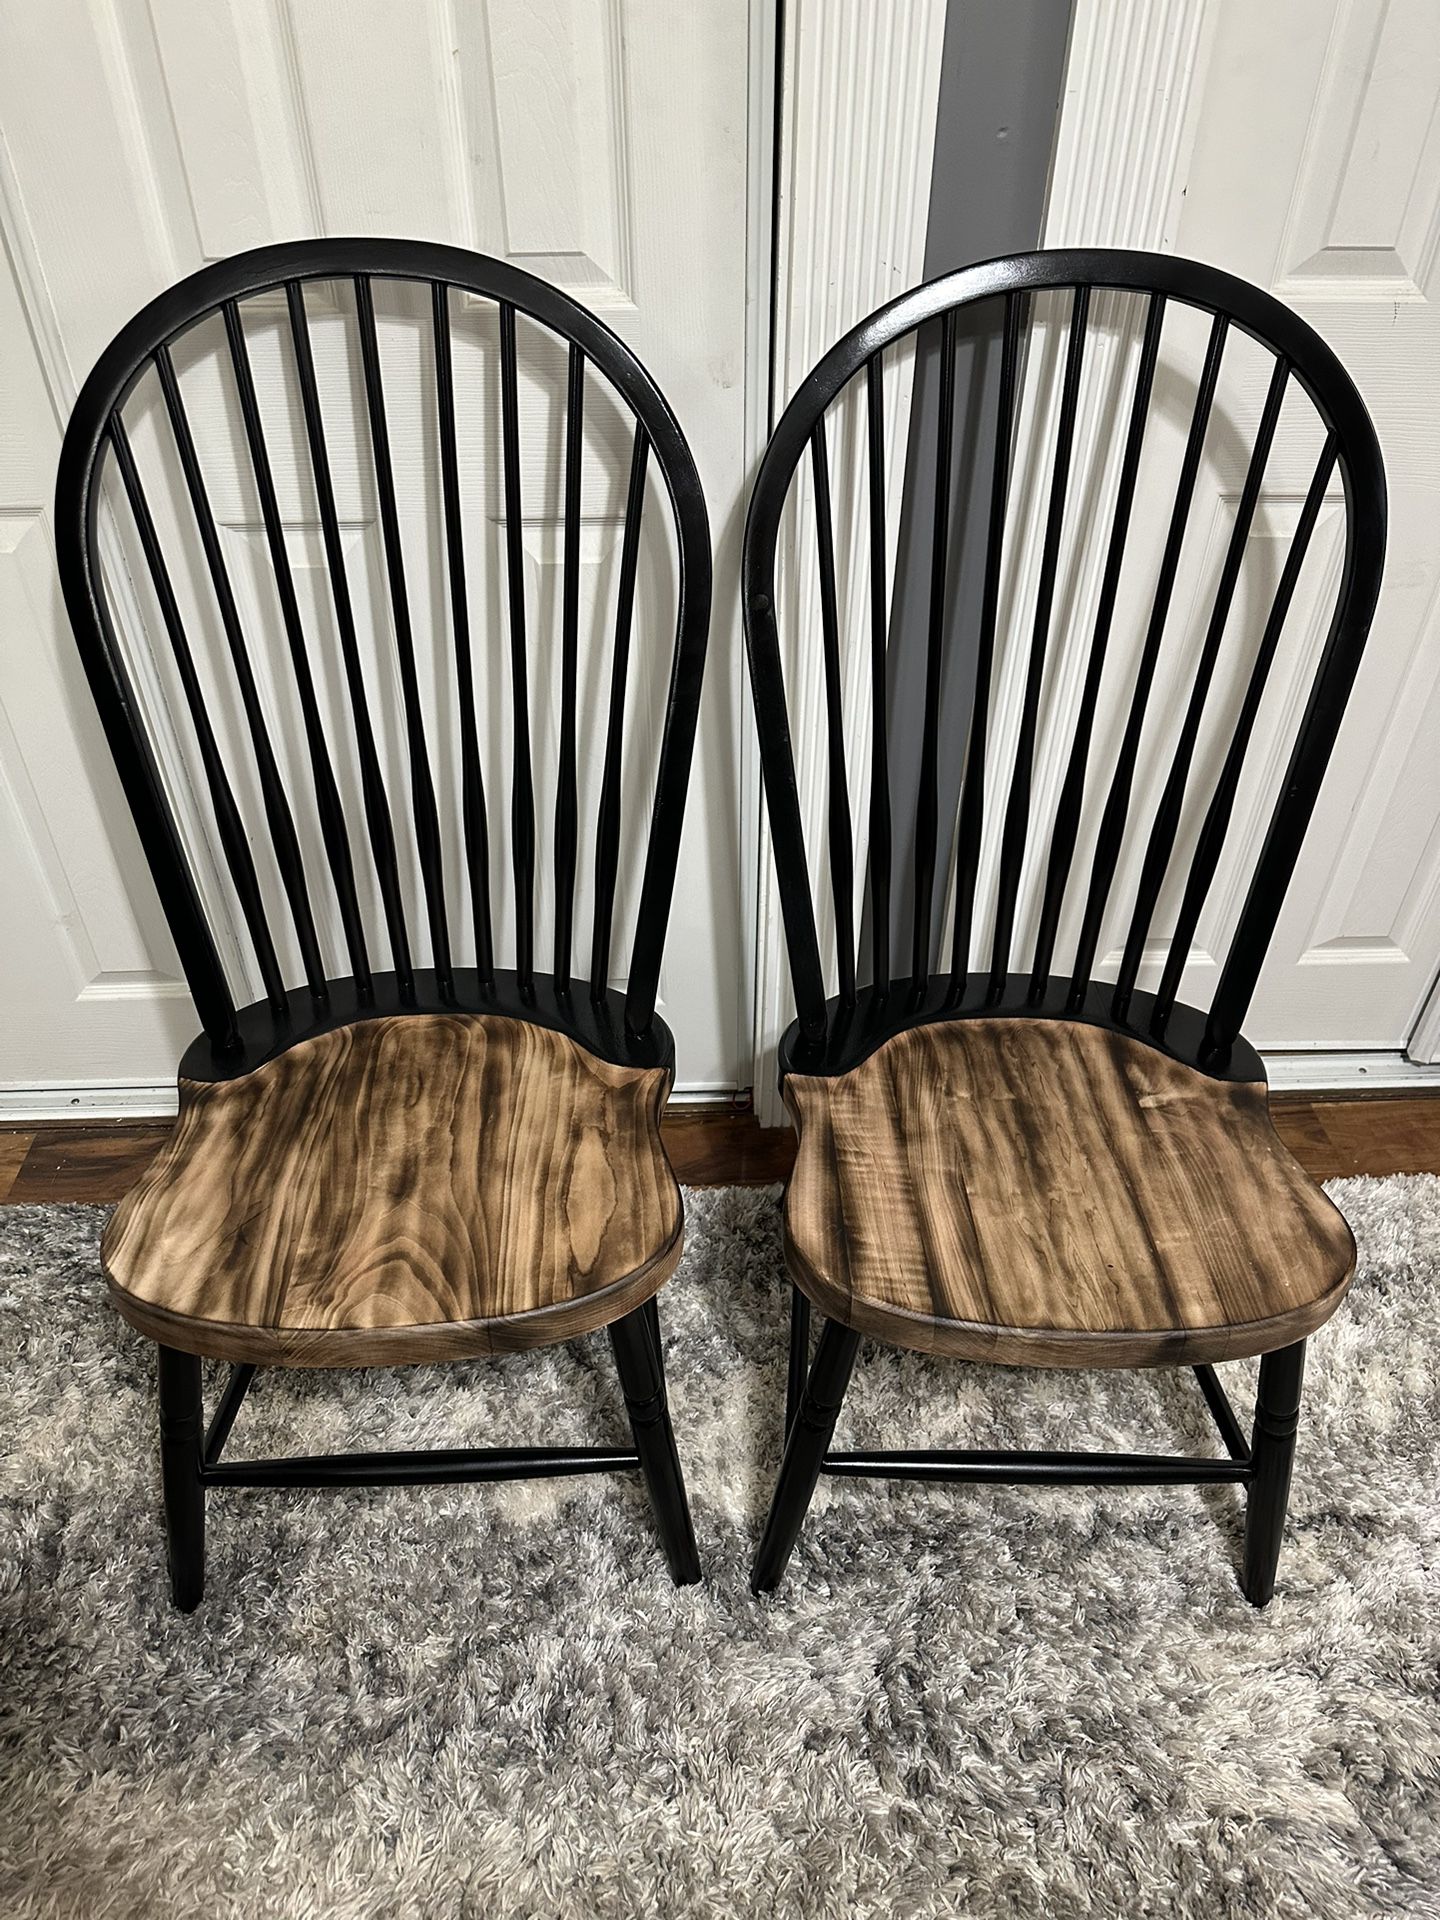 Burned Dining Chairs Set Of 2 Refinished- Read Description 